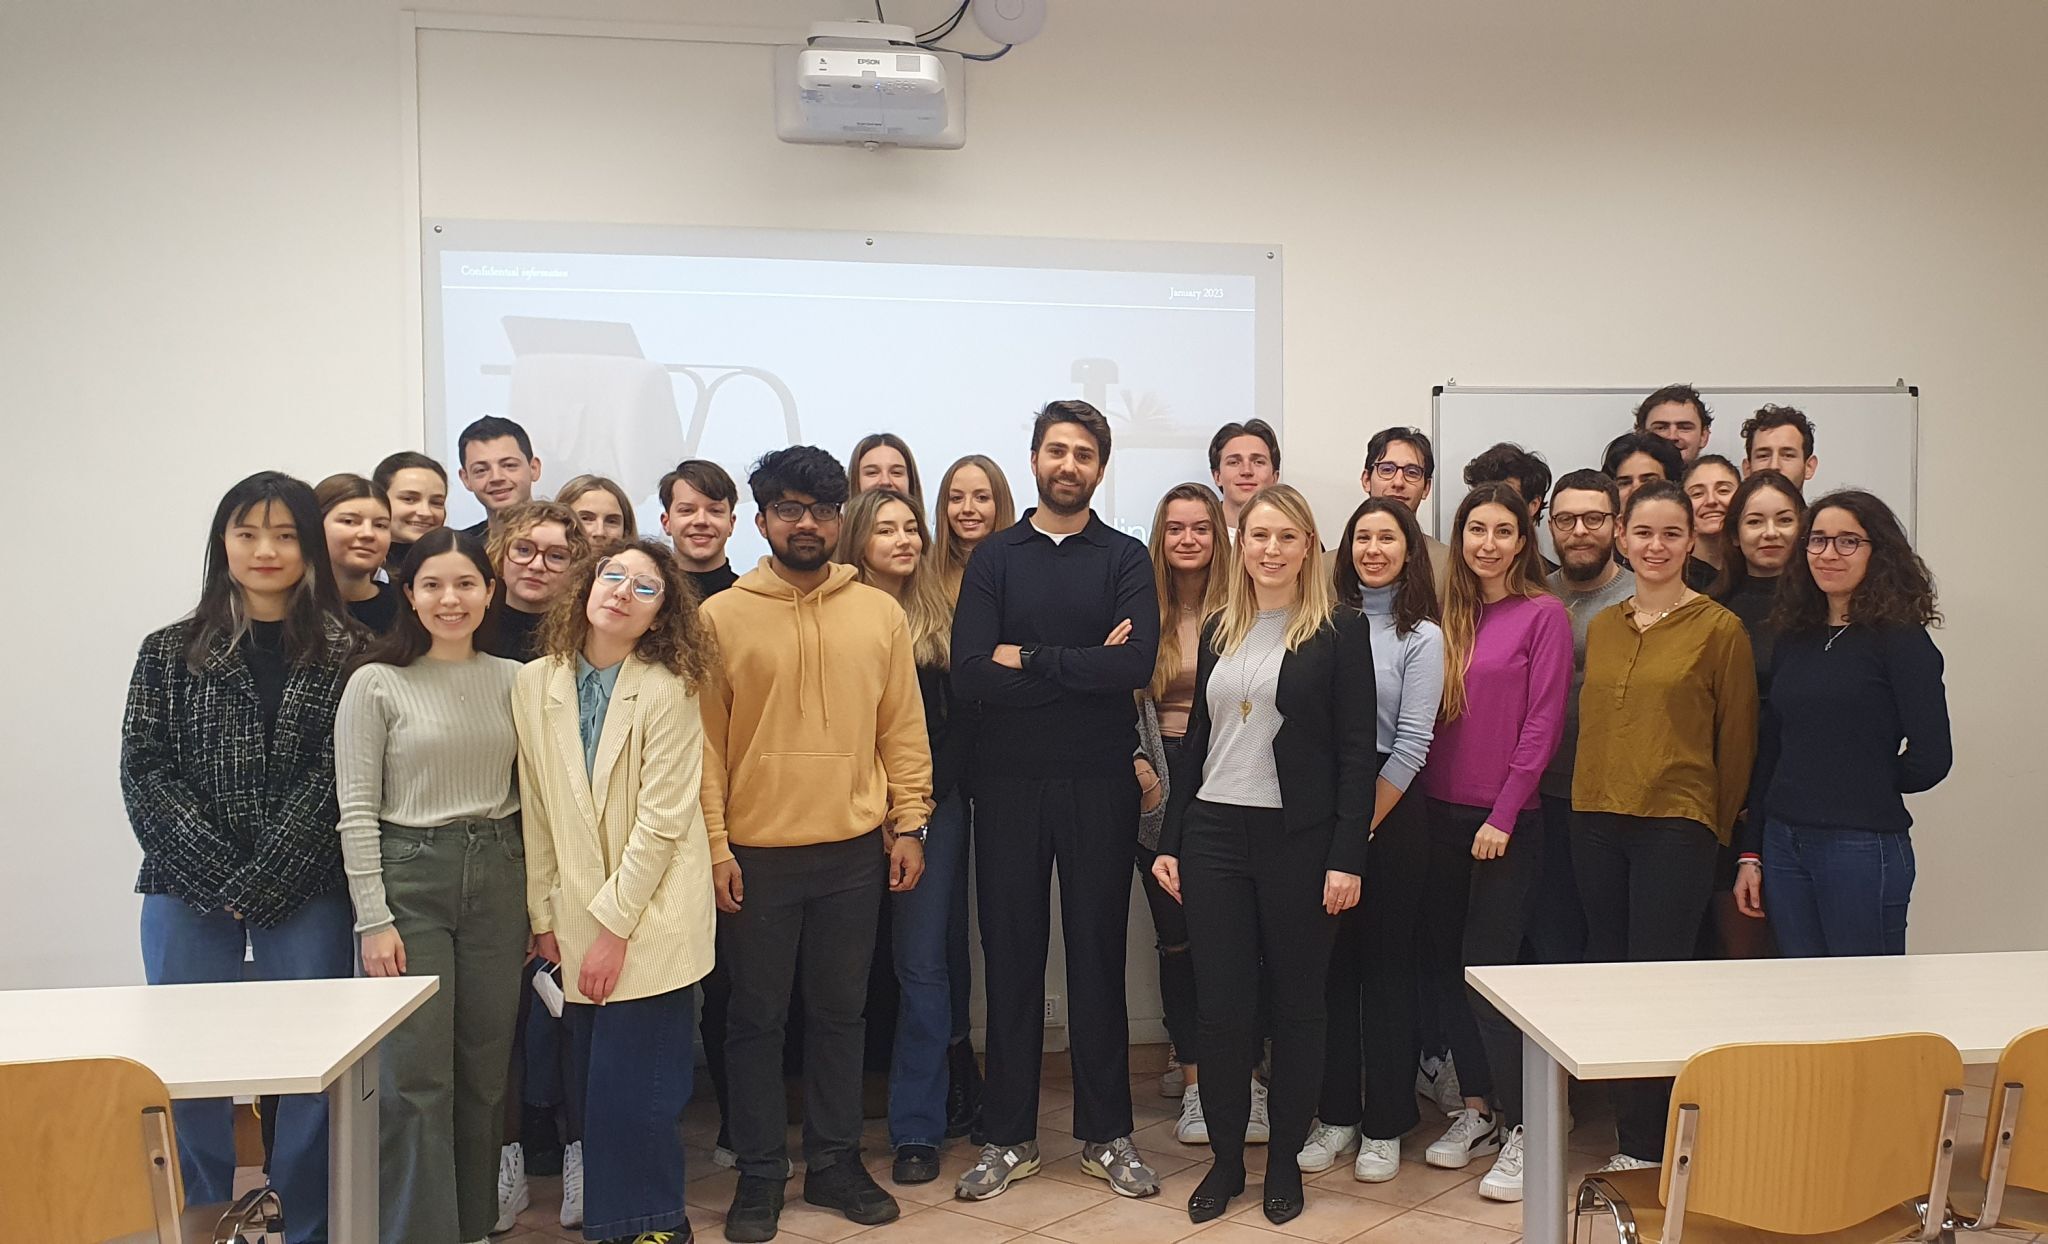 Alessandro Lovisetto was a guest speaker at ESCP Business School during Prof. Isabella Maggioni's class for the Master in Management students – Luxury Marketing and Option-E specialisations.